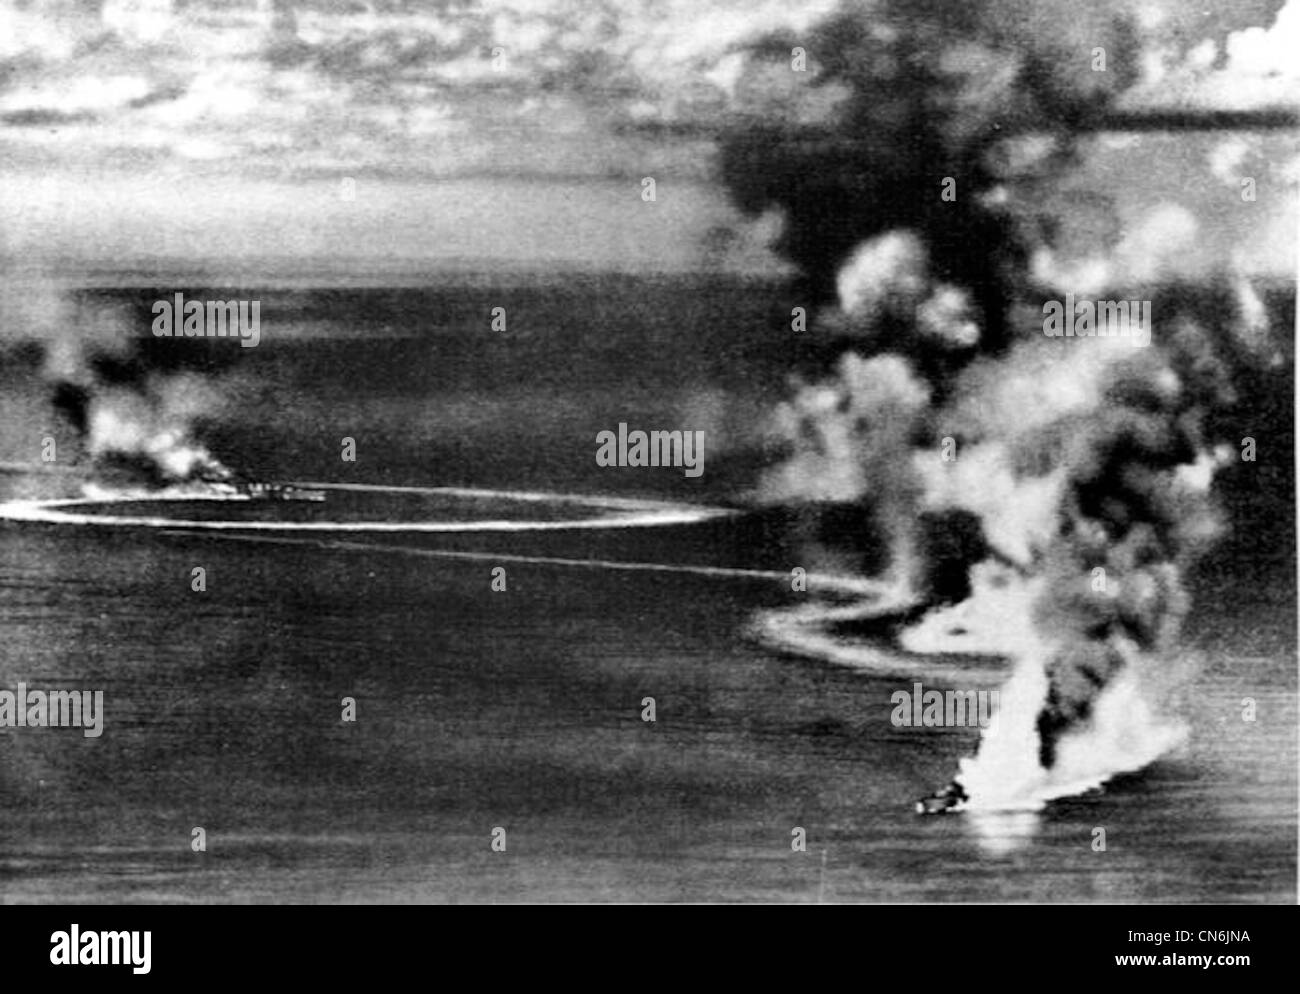 The Royal Navy heavy cruisers HMS Dorsetshire and HMS Cornwall under heavy air attack by Japanese carrier aircraft on 5 April 1942. The photo was taken from a Japanese aircraft. Stock Photo